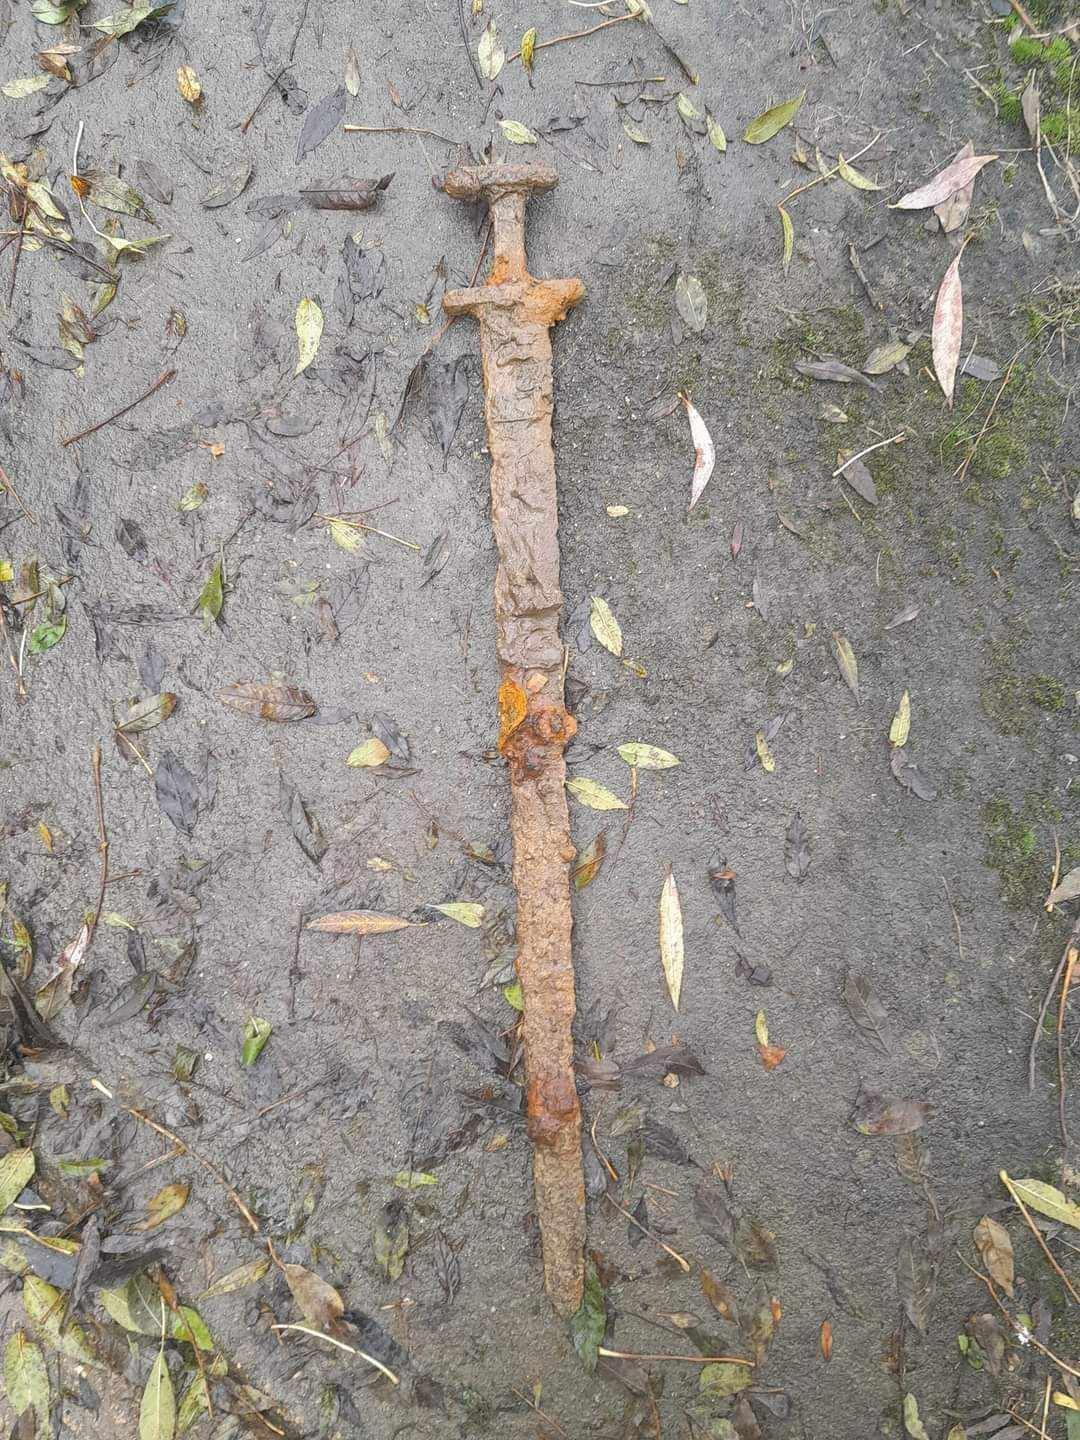 A fisherman catches an ancient Viking sword in Britain (photo)